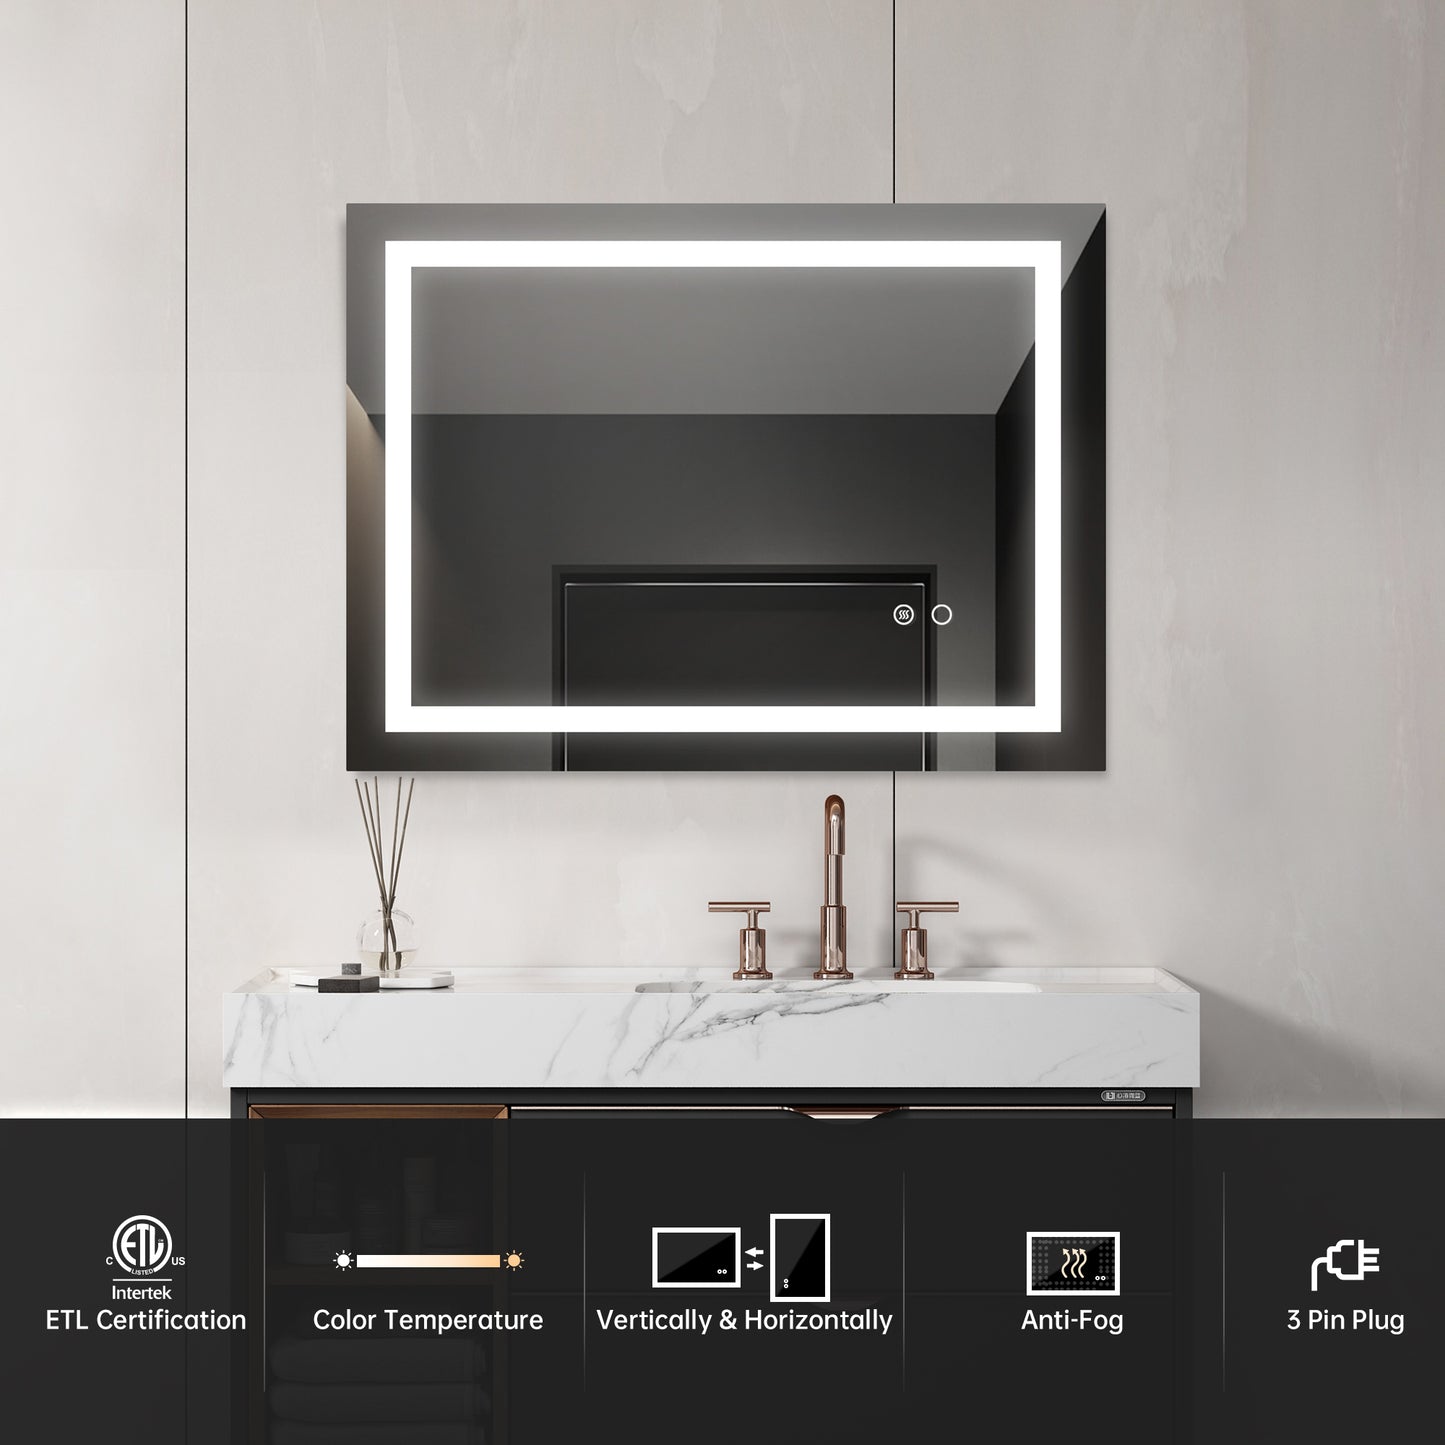 36x 28 Inch LED Mirror Bathroom Vanity Mirrors with Lights, Wall Mounted Anti-Fog Memory Large Dimmable Front Light Makeup Mirror